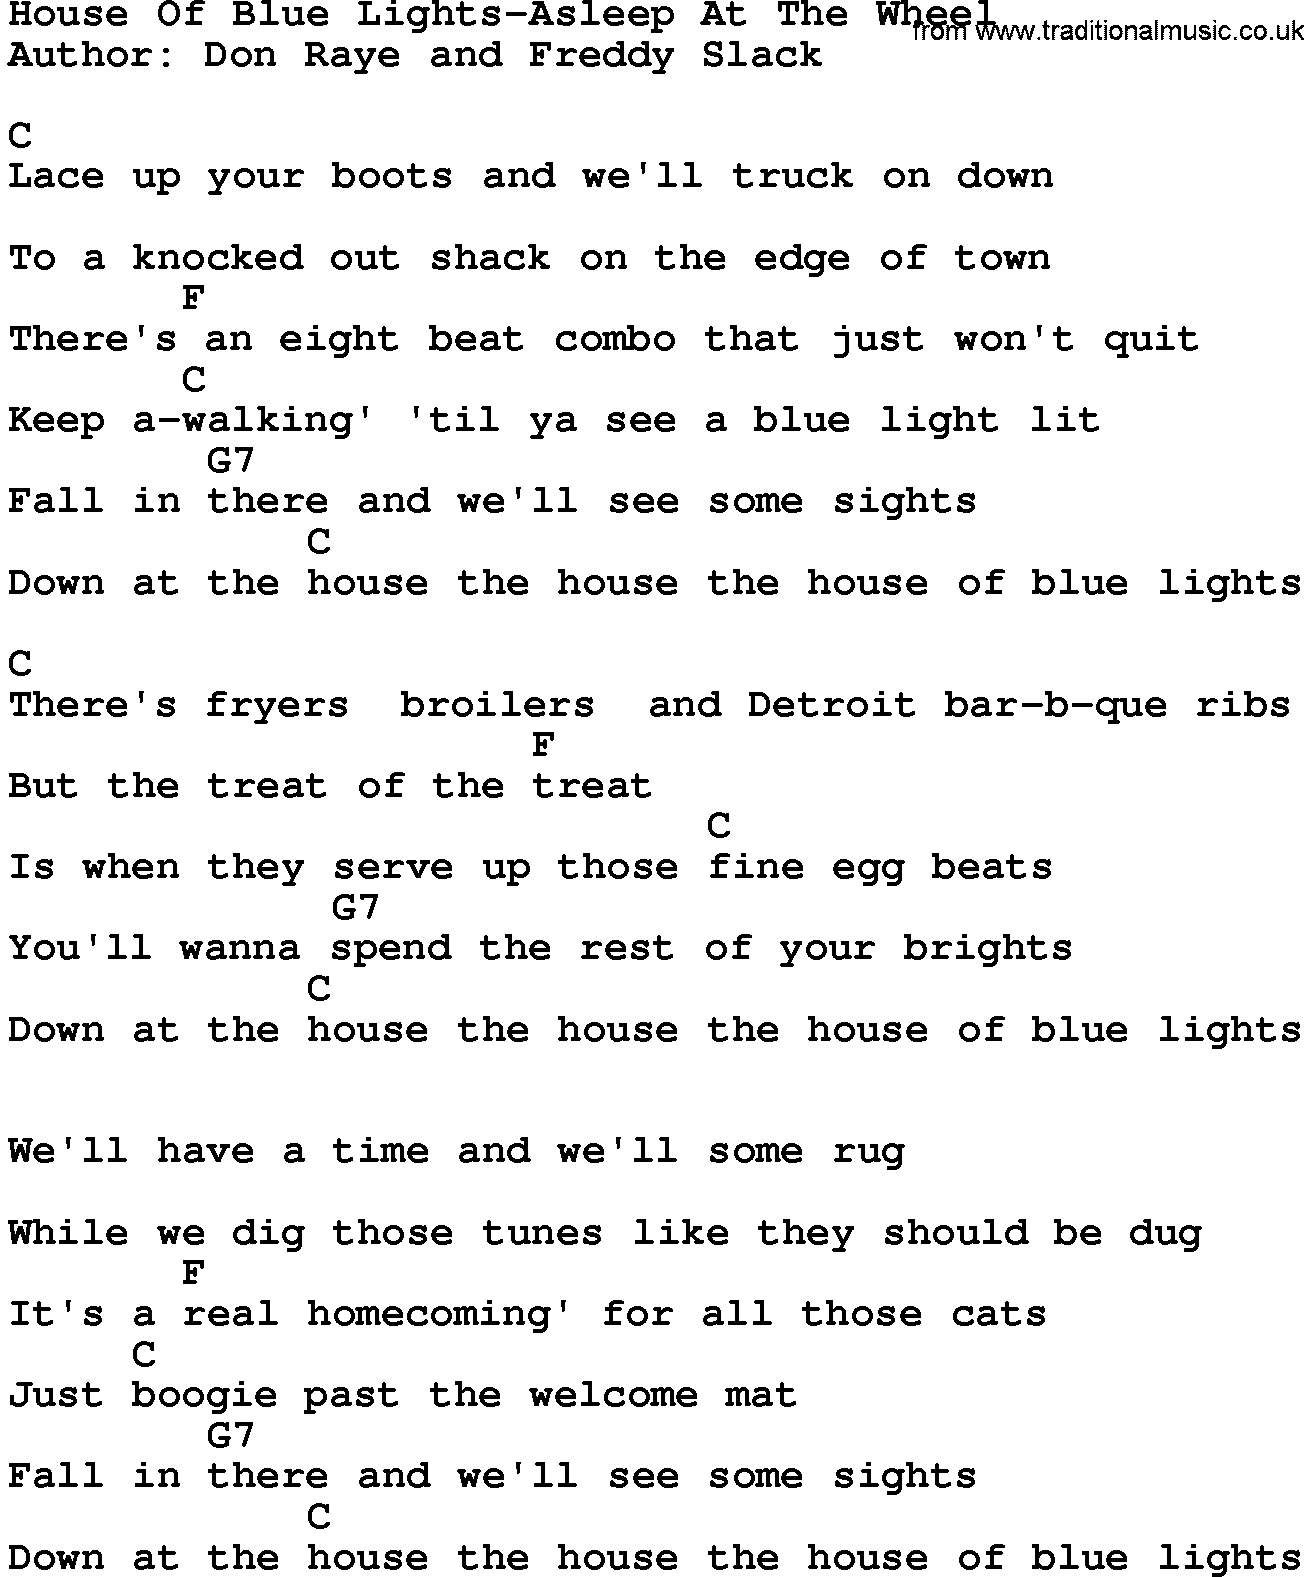 Country music song: House Of Blue Lights-Asleep At The Wheel lyrics and chords